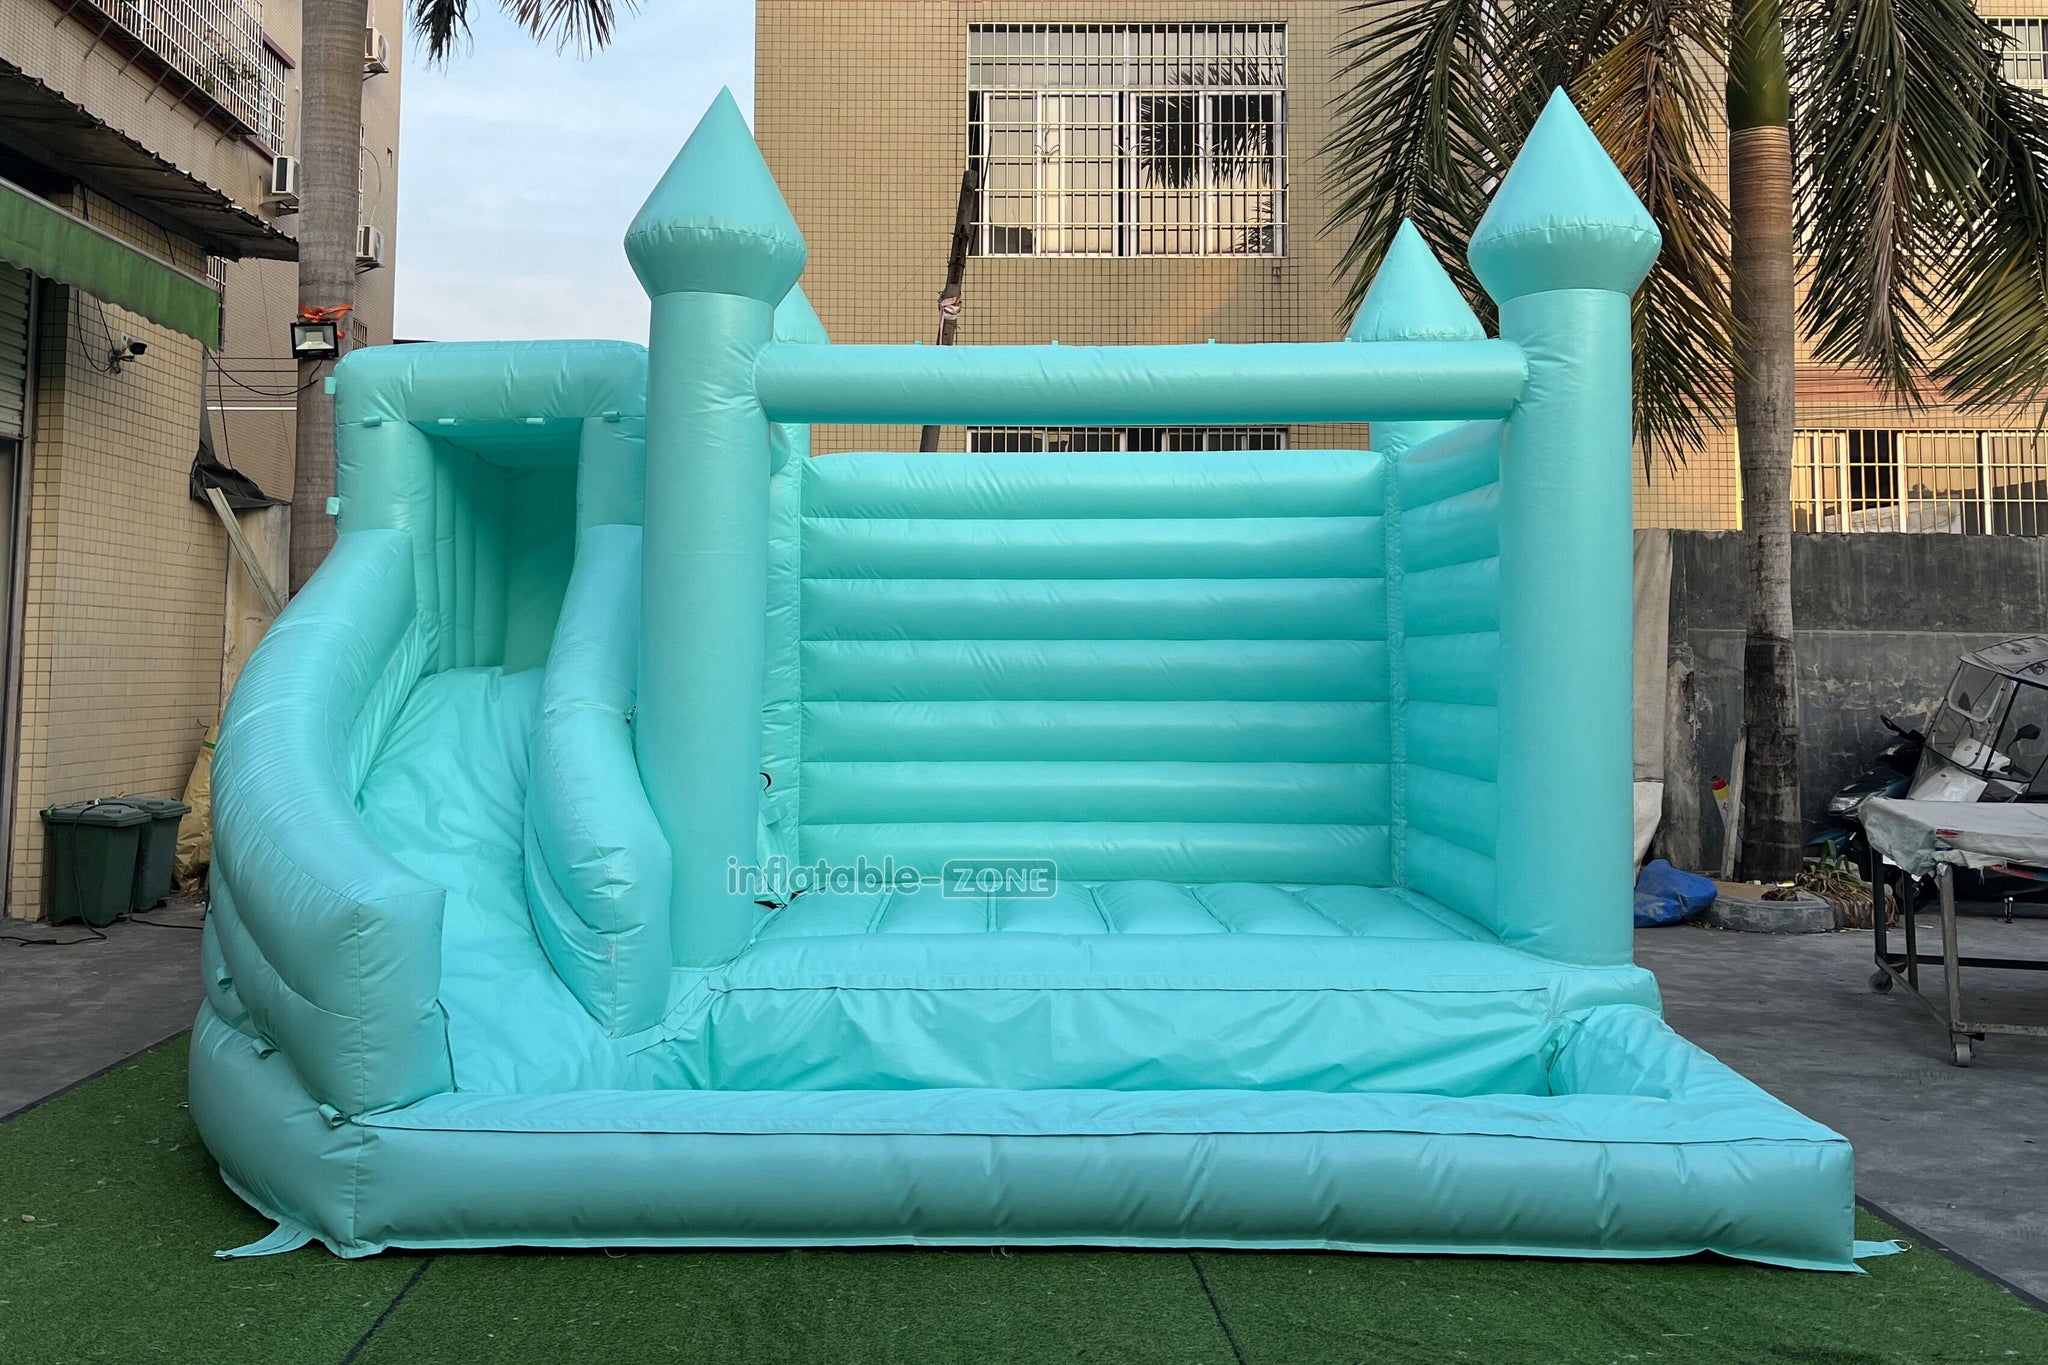 Mint Green Bouncy Castle With Slide Combo Happy Jump Inflatables Fun In The Sun Bounce House